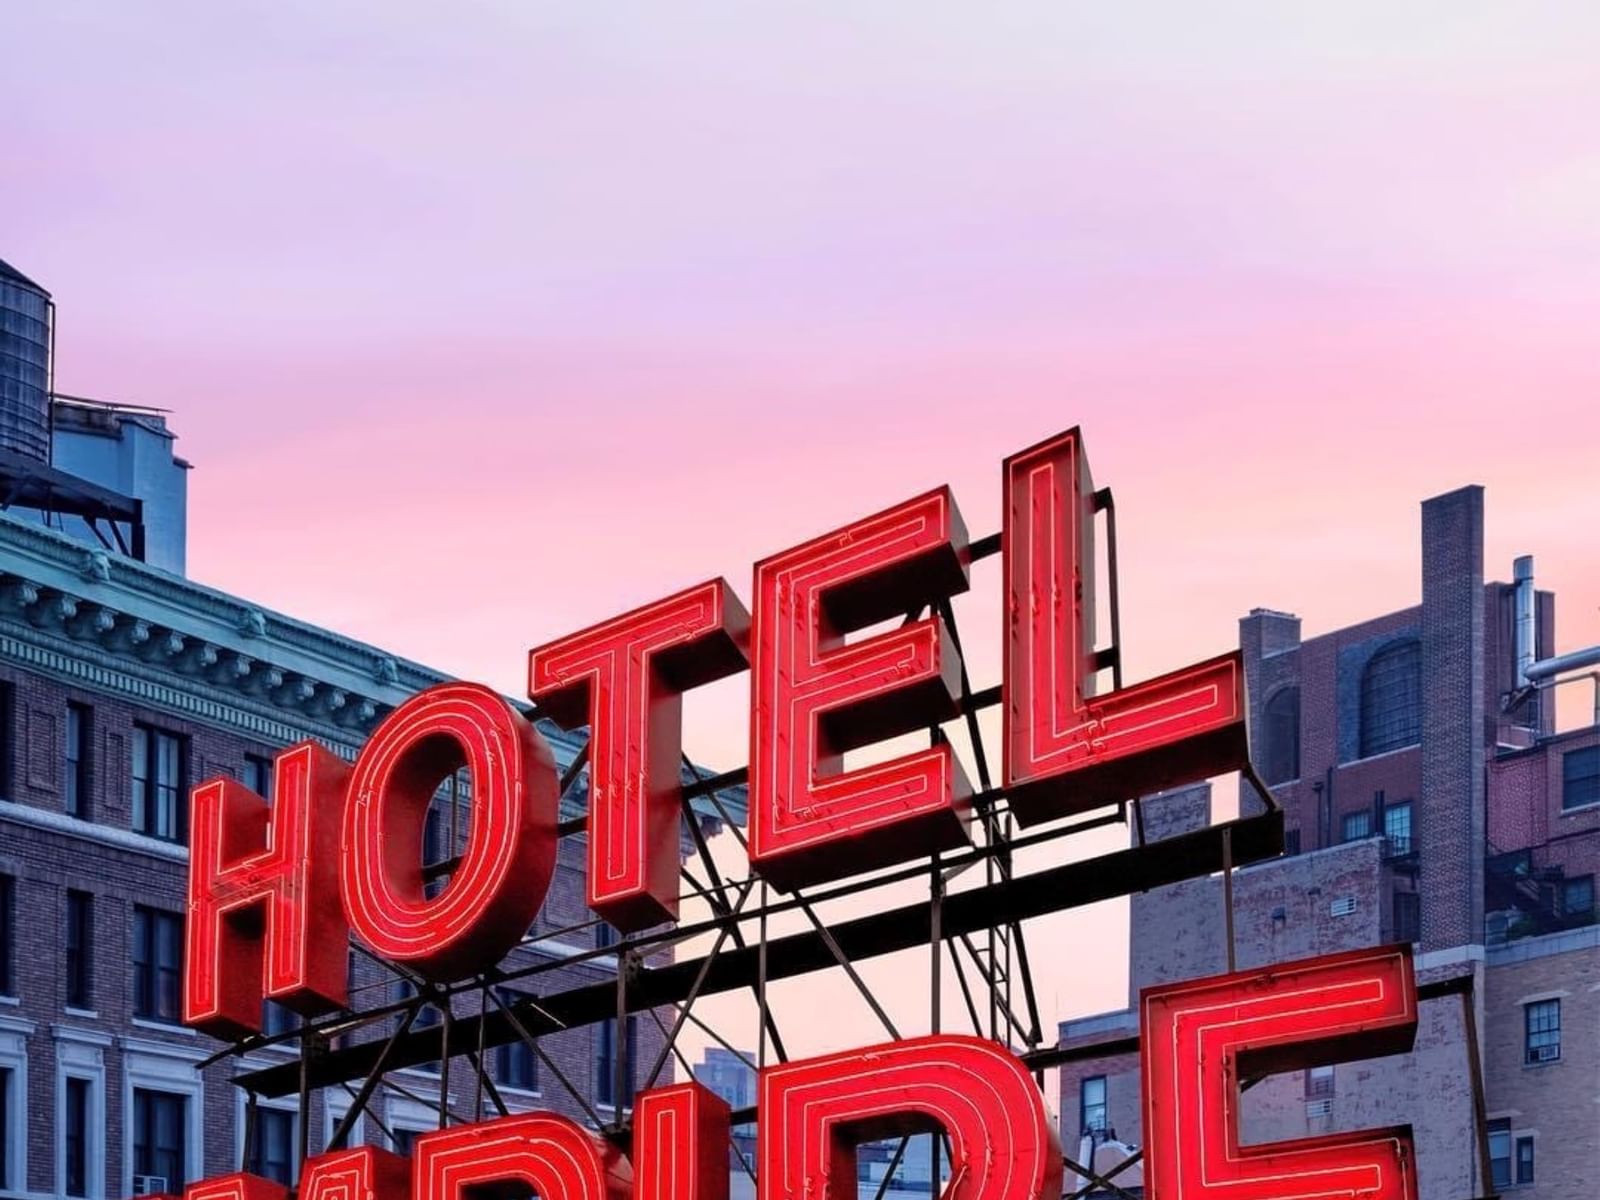 Empire Hotel NYC - Rooftop Signage Sunset